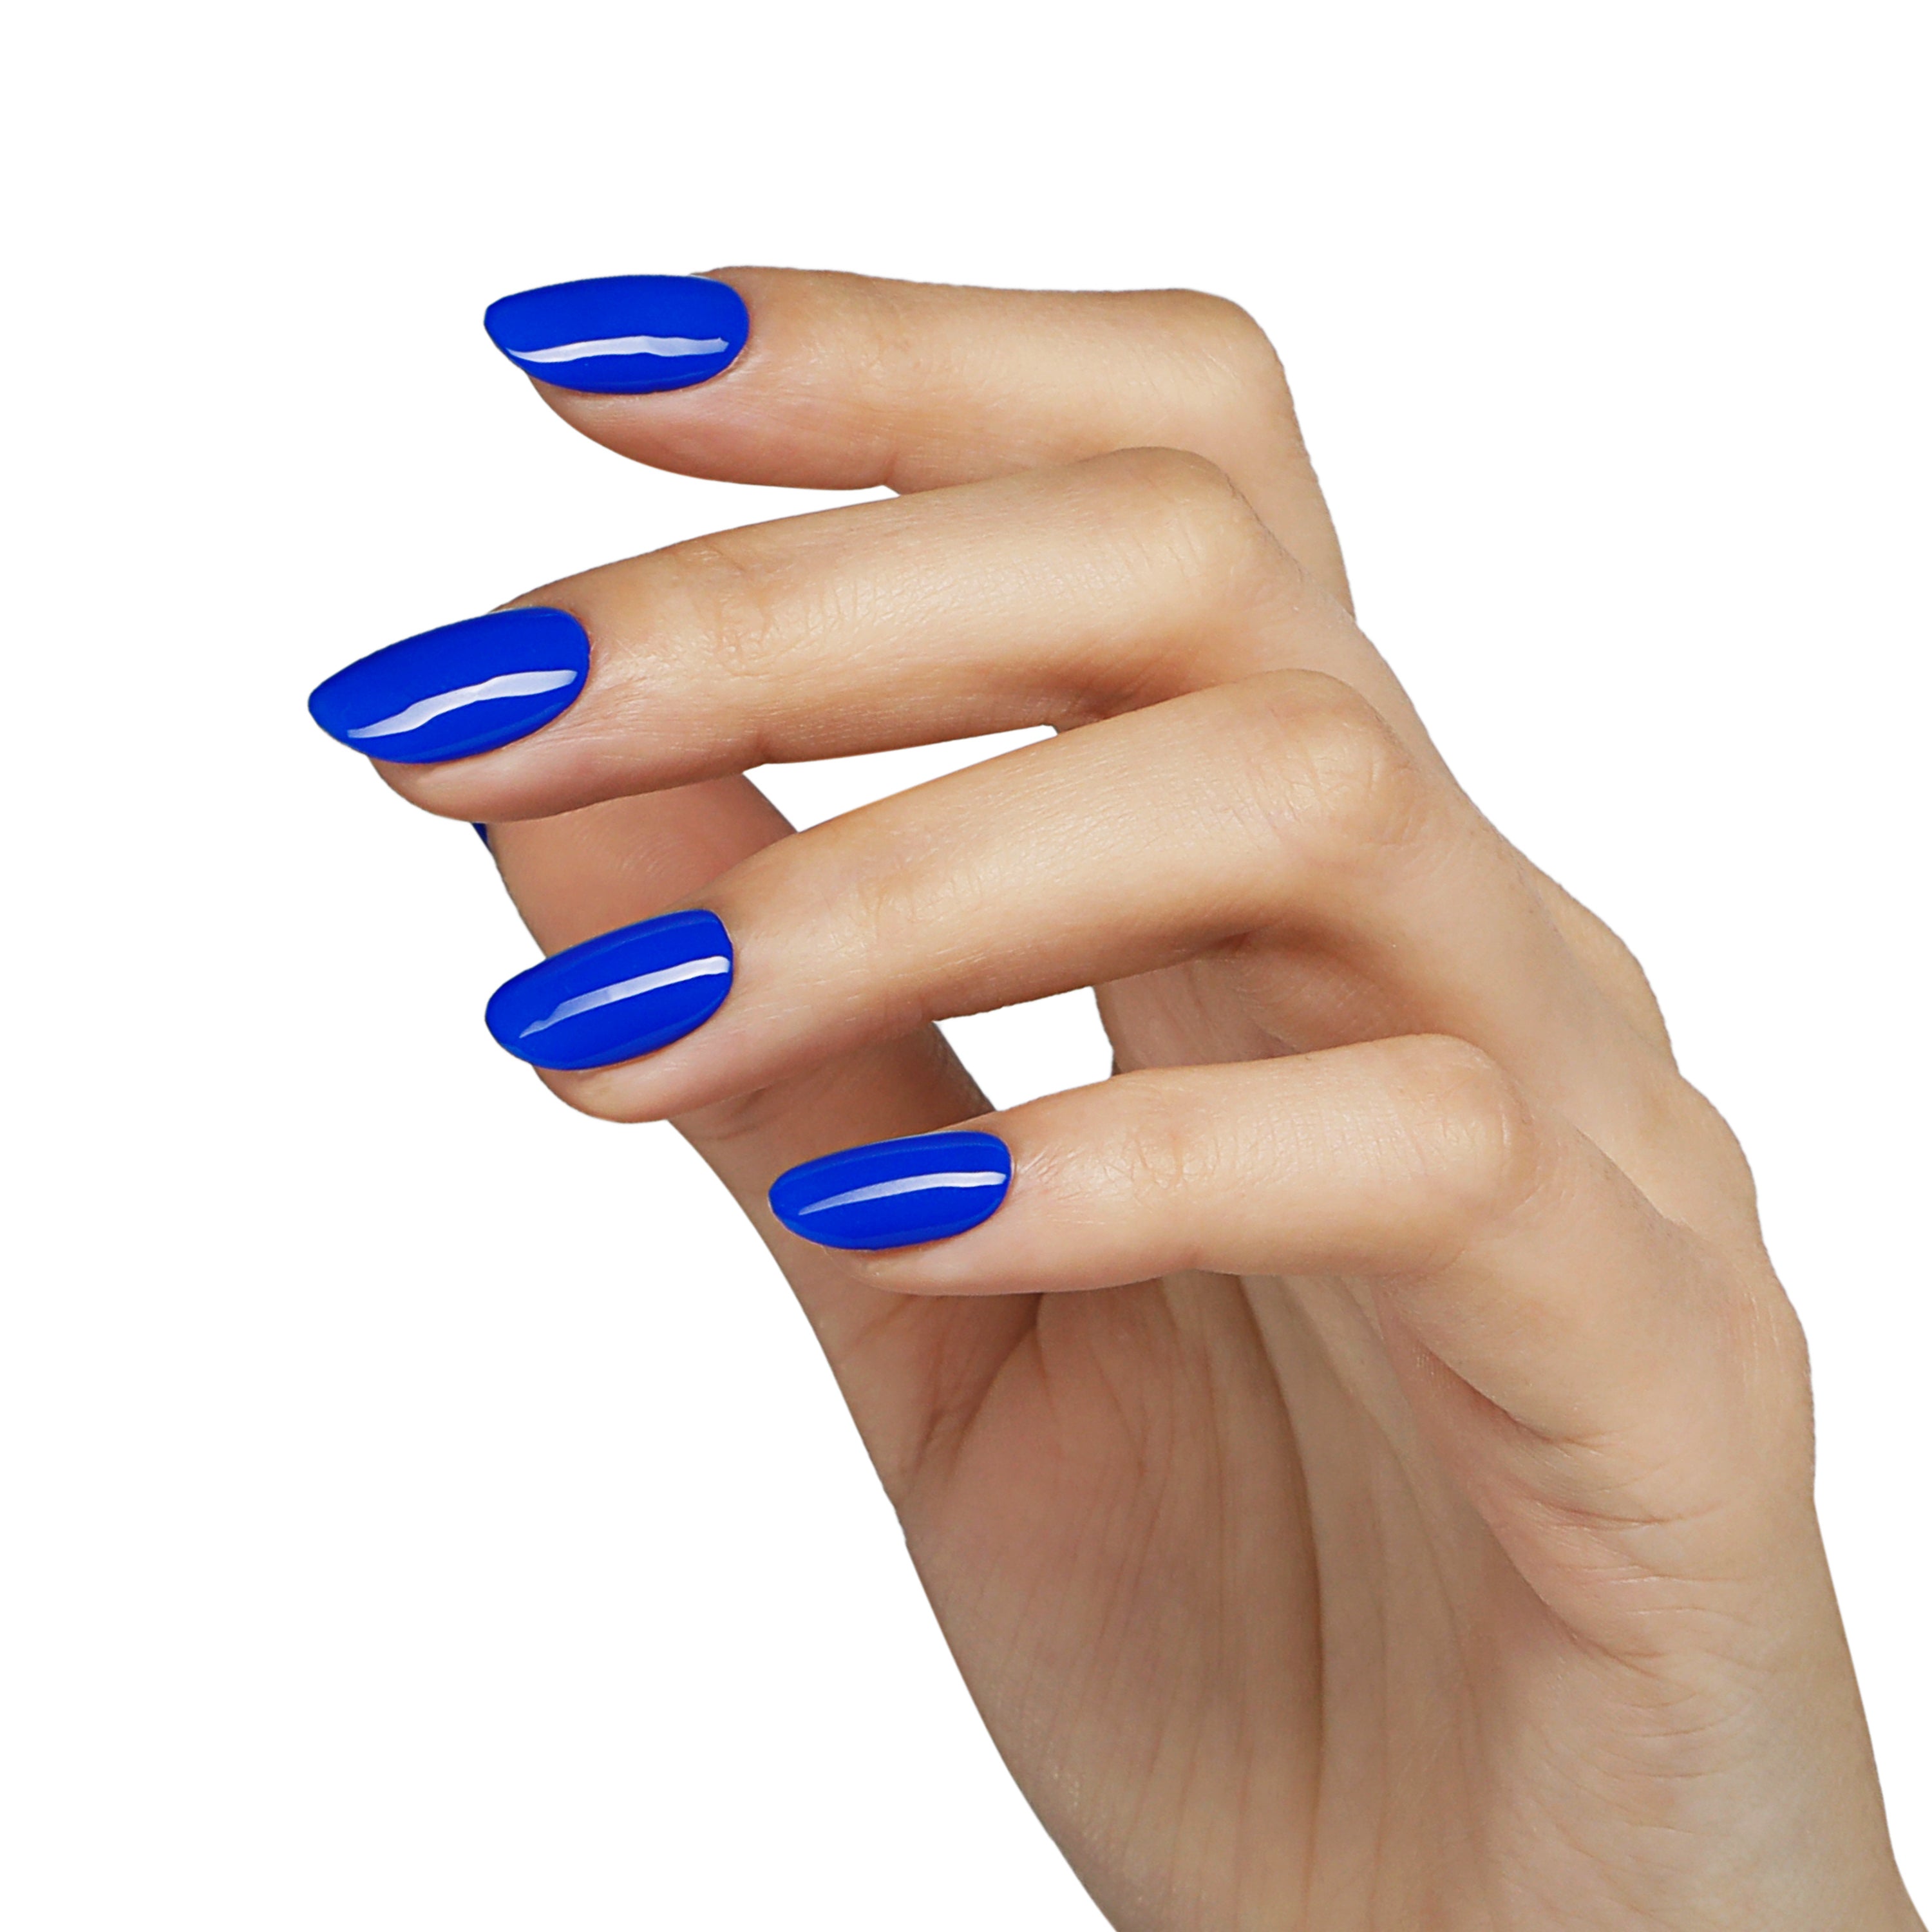 What Color Nail Polish With Royal Blue Dress? – ORLY